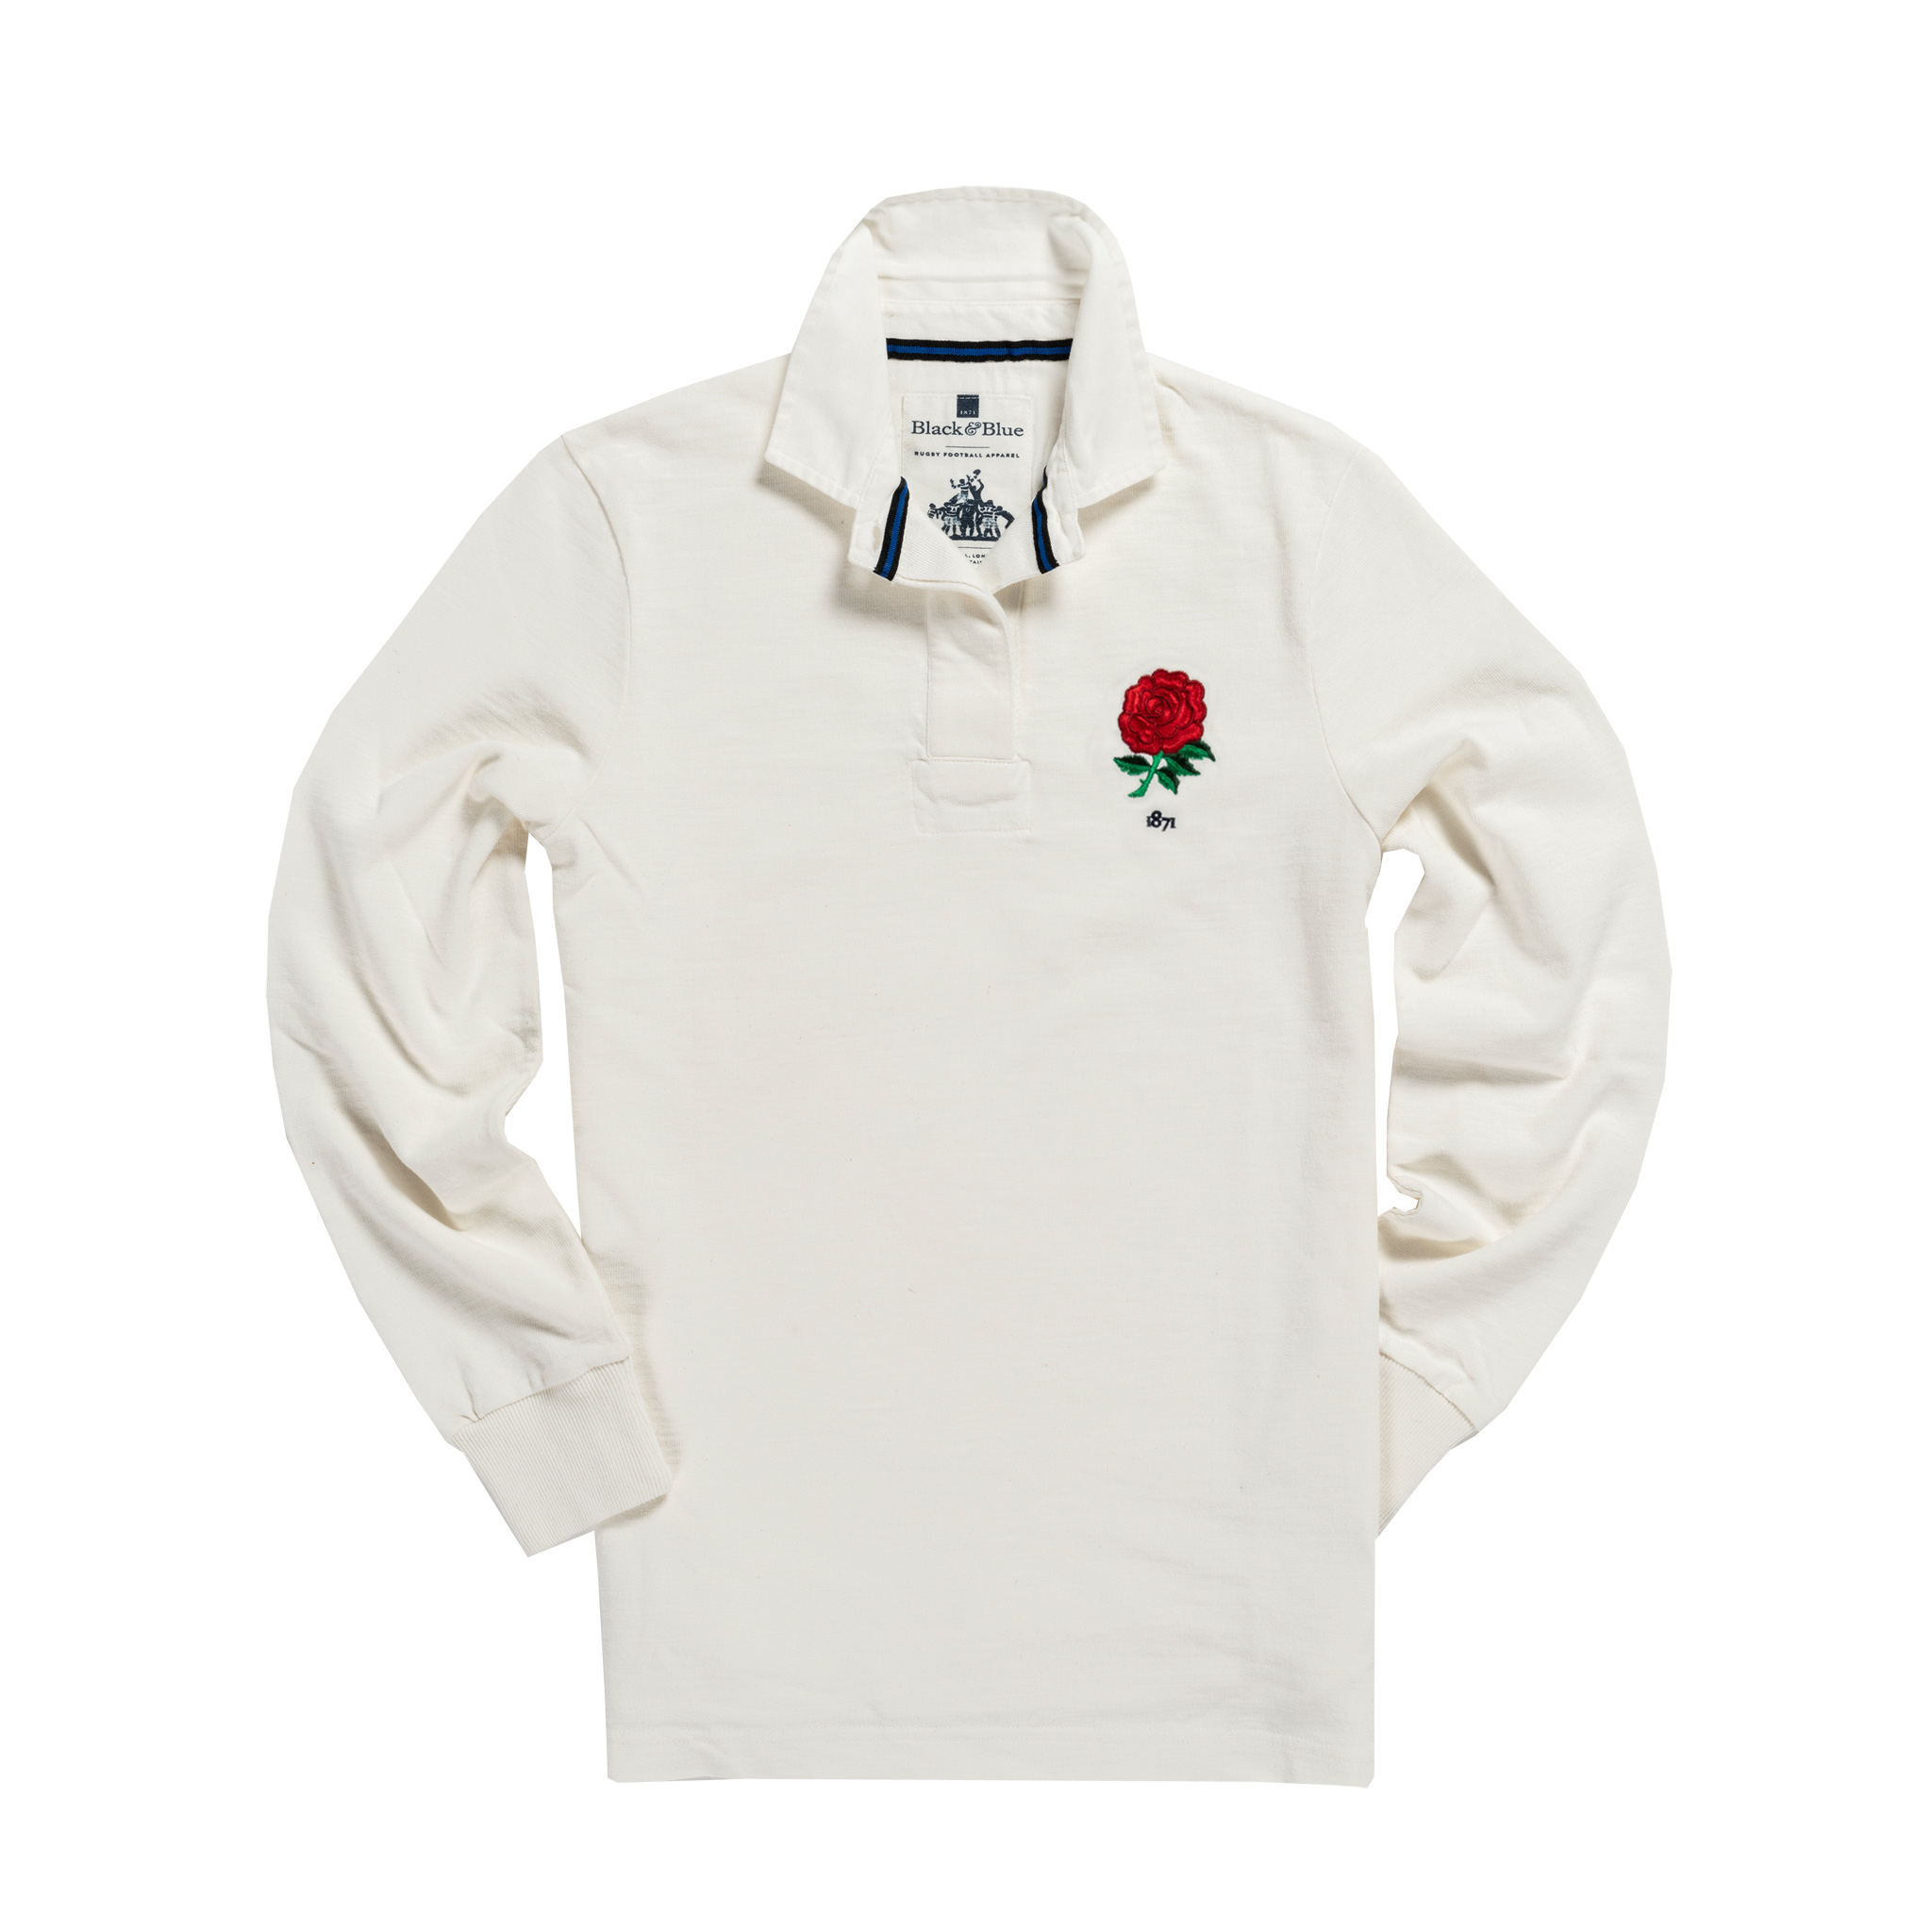 Women's England 1871 Vintage Rugby Shirt